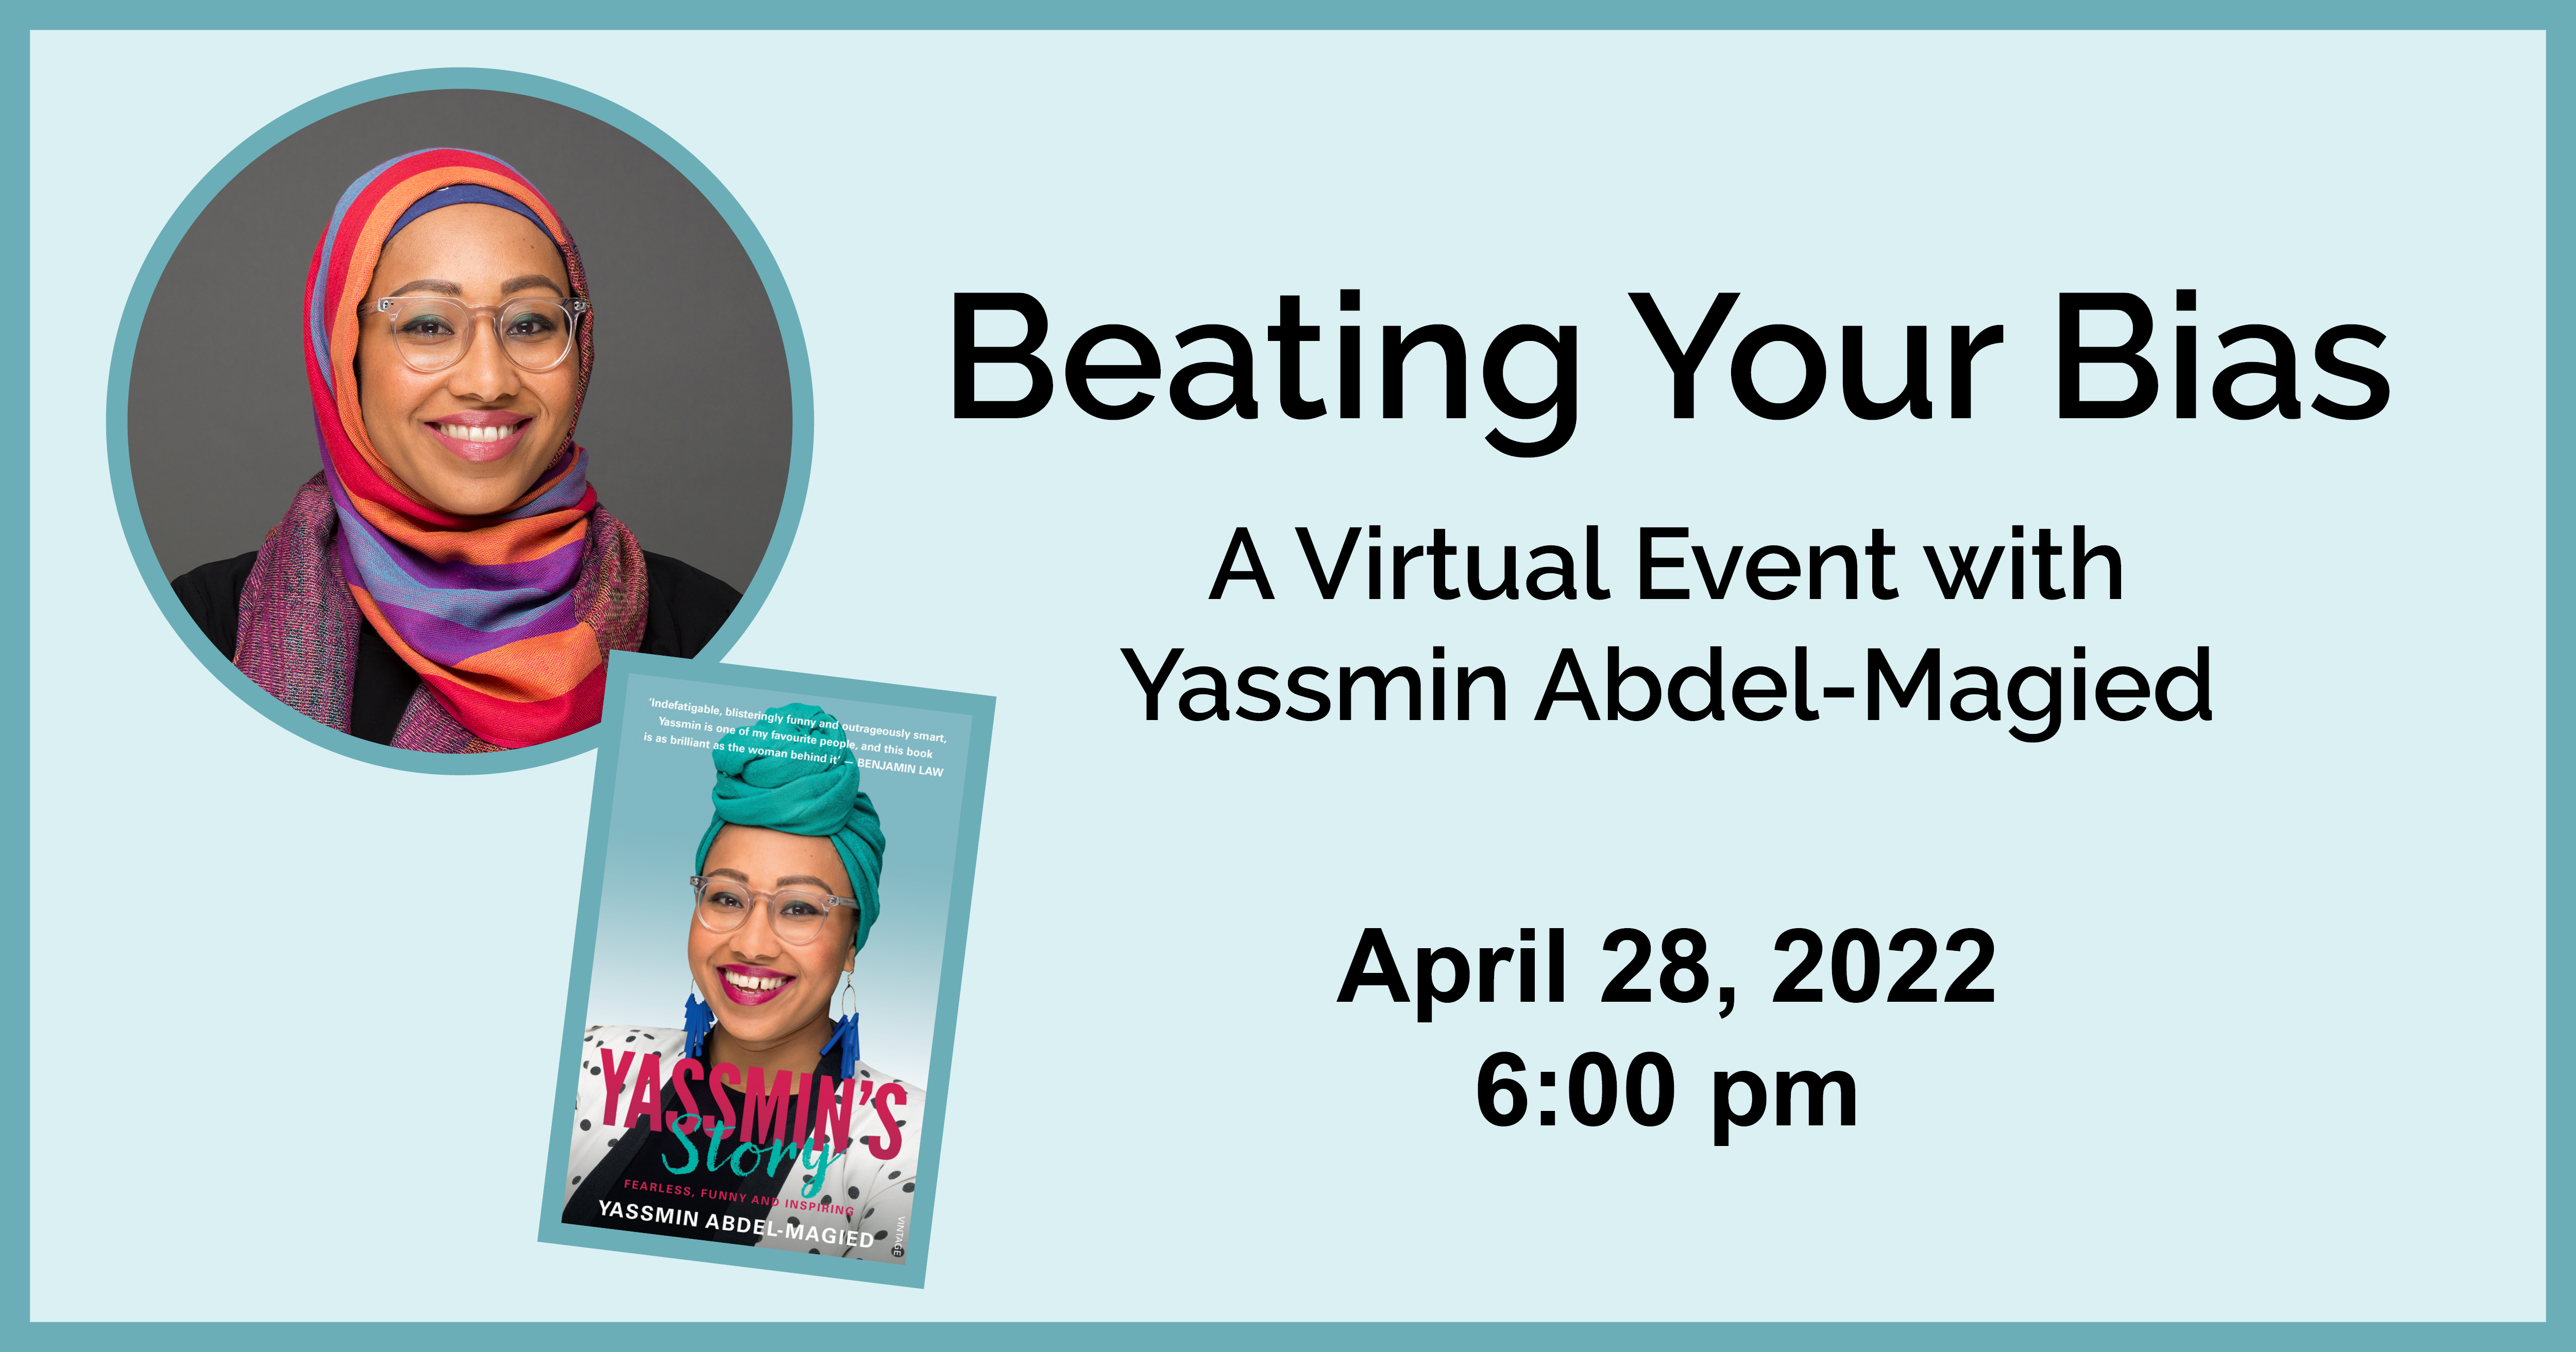 Beating Your Bias - a virtual event with Yassmin Abdel-Magied